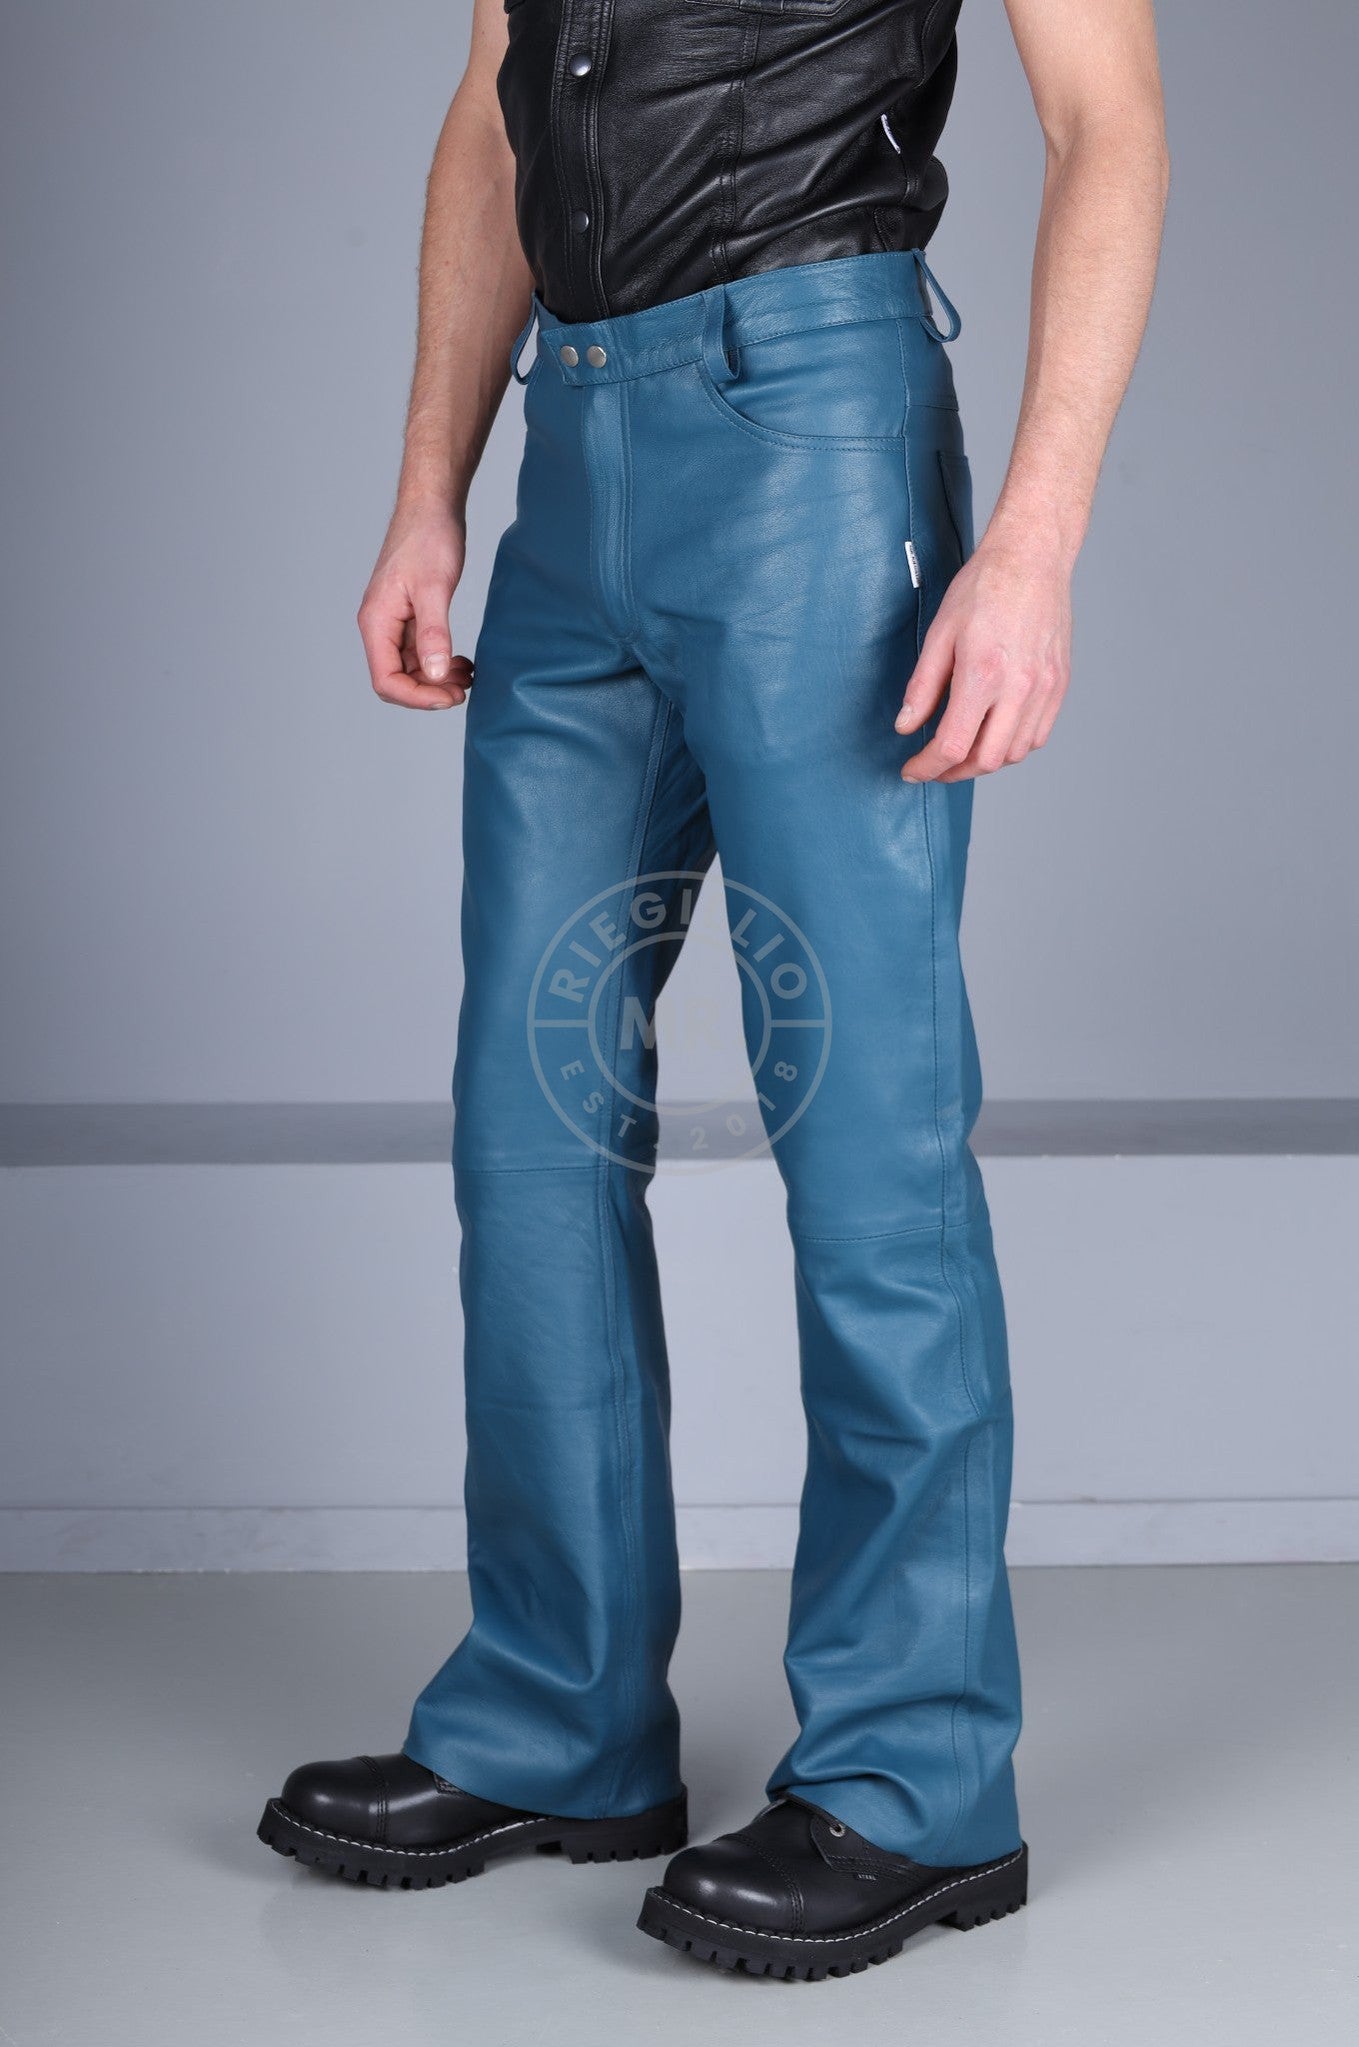 MENS MOTORCYCLE BIKERS BLACK AND BLUE LEATHER PANTS JEANS TROUSER - (J5-BLU)  - Leather Addicts